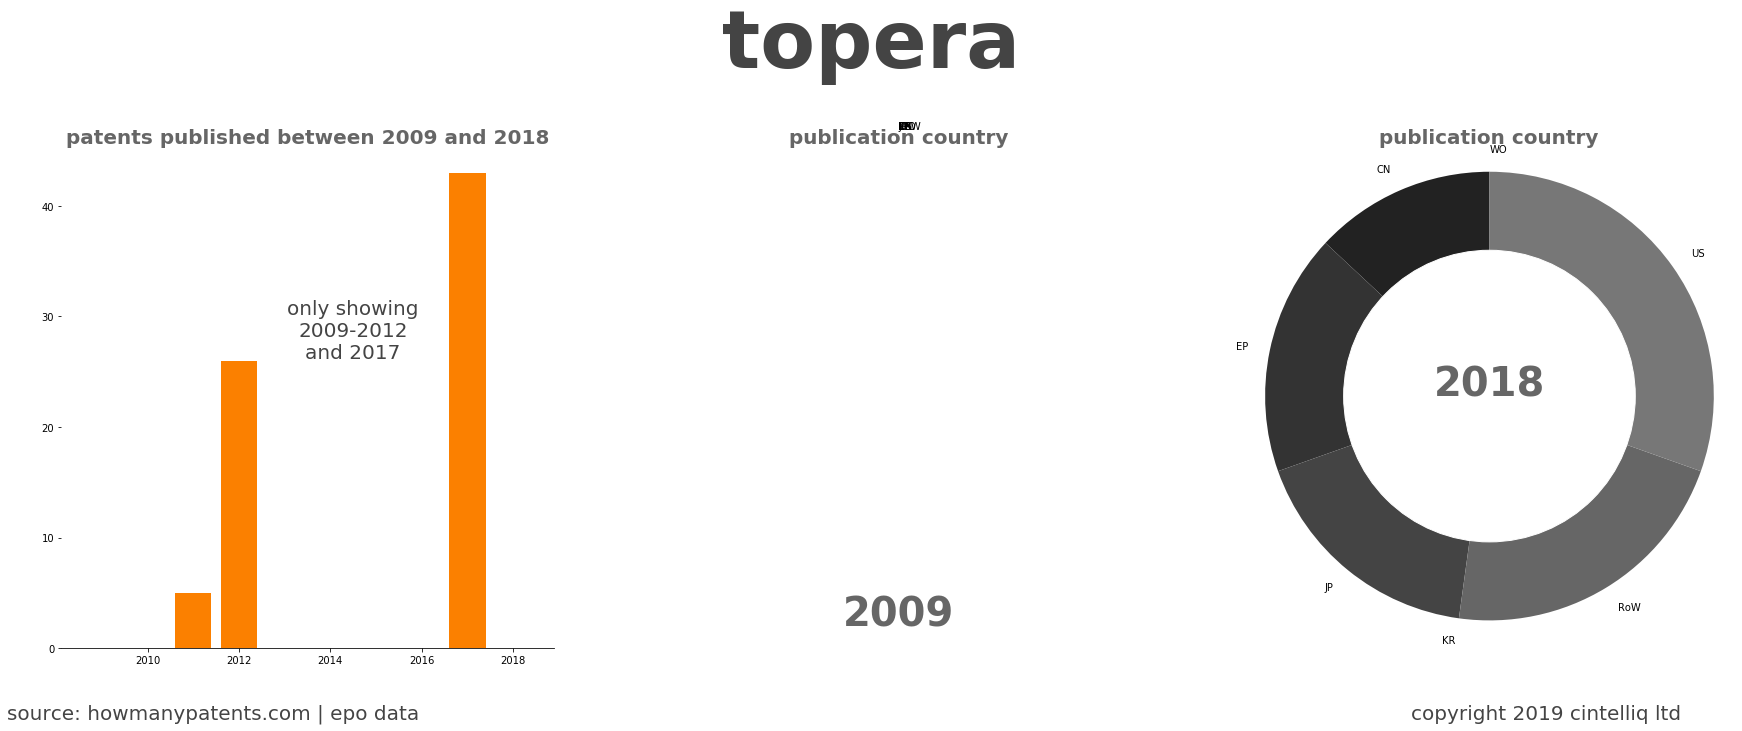 summary of patents for Topera